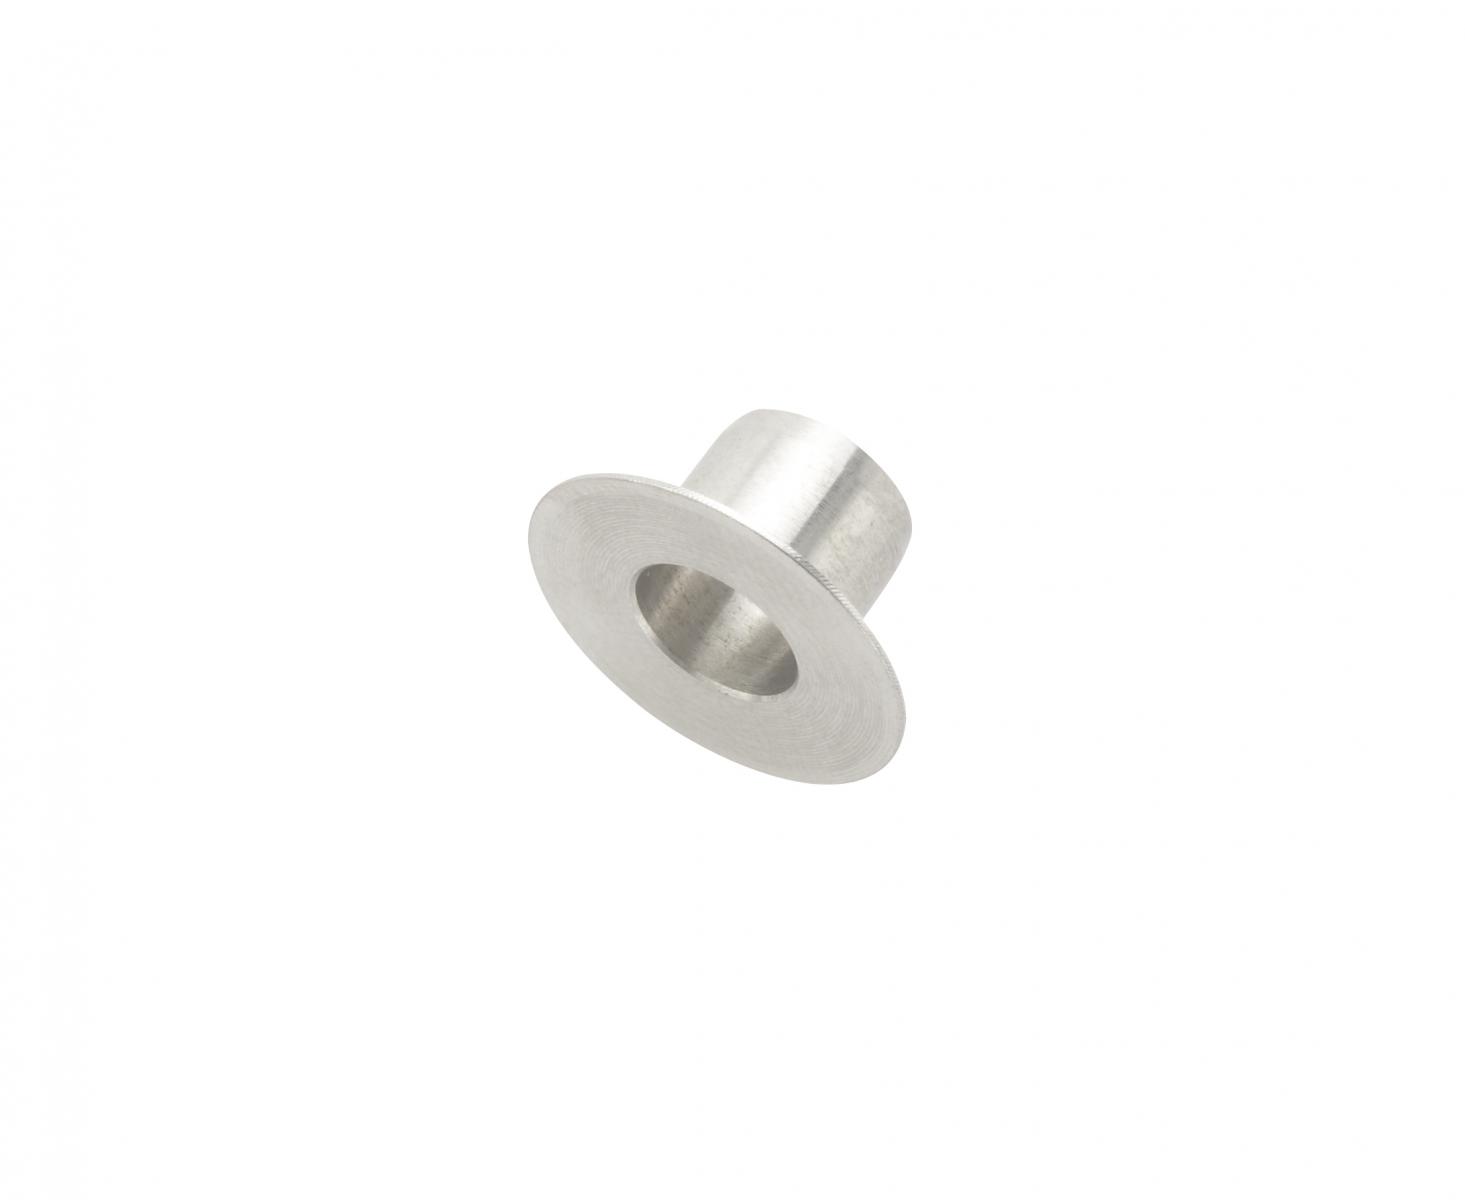 TapeTech® Taper Head Bushing (Creaser Side). Part number 050086